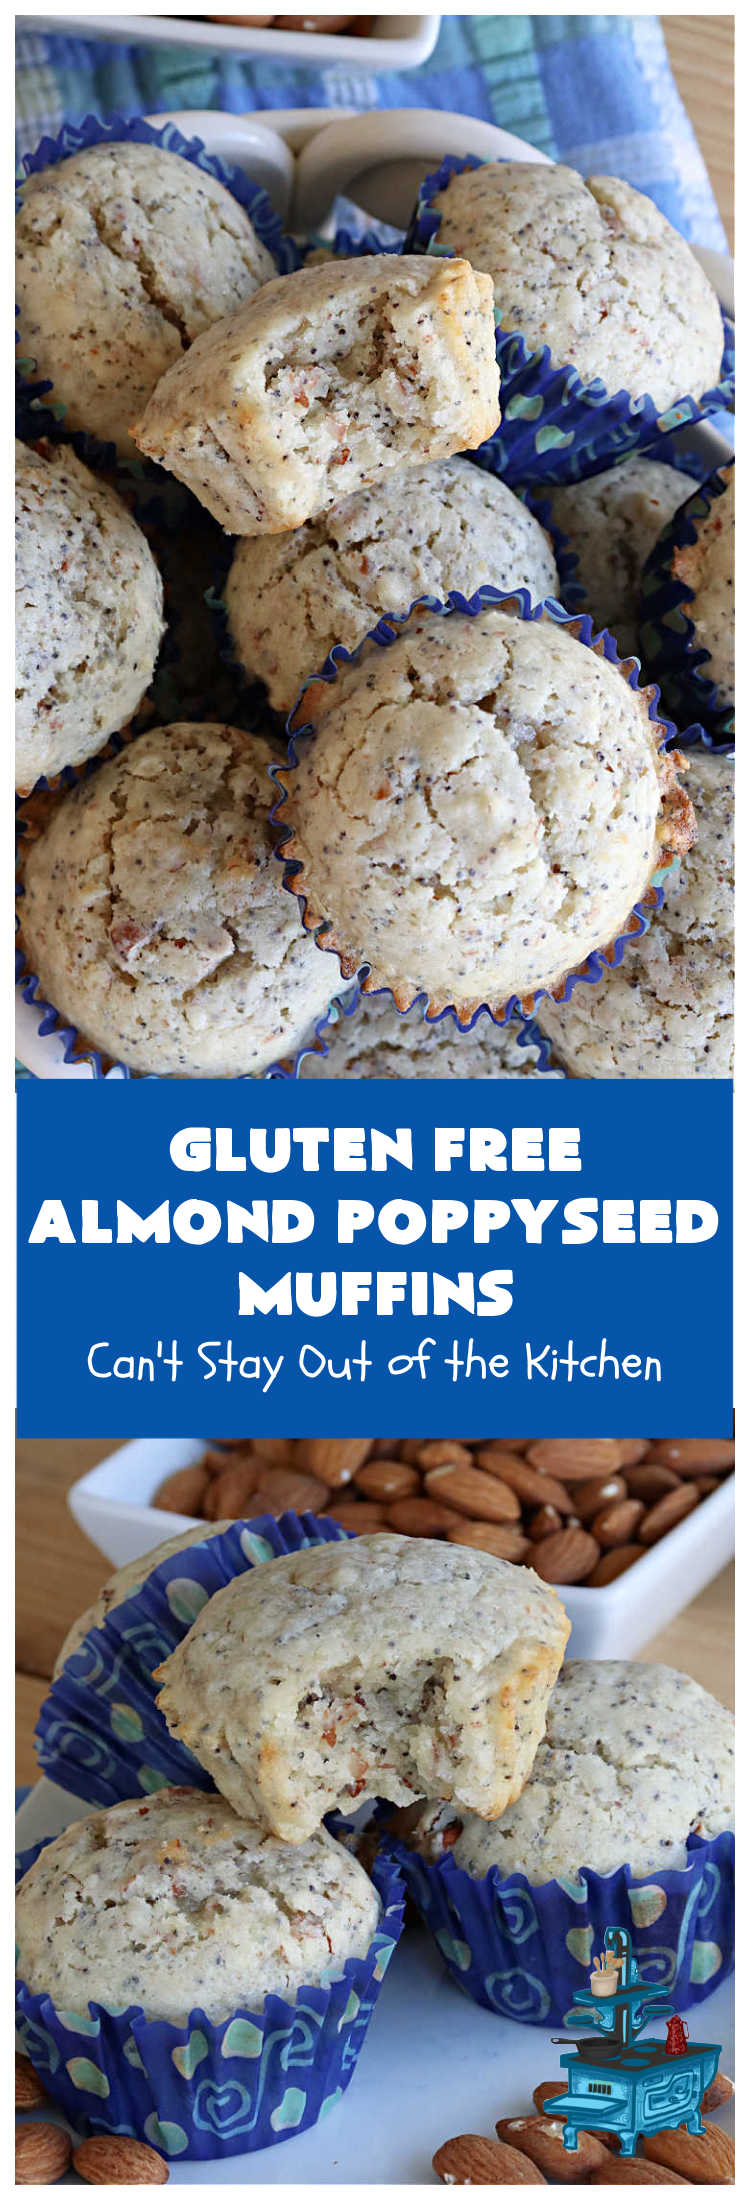 Gluten Free Almond Poppyseed Muffins | Can't Stay Out of the Kitchen | these moist, delicious #muffins include both #AlmondExtract & diced #almonds along with #poppyseeds for a wonderfully delightful & yummy #breakfast or #brunch idea. Using #GlutenFree flour allows your GF family or friends to also enjoy these fantastic #BreakfastMuffins. Great for a weekend, company or #holiday breakfast especially #Thanksgiving or #Christmas. #GlutenFreeAlmondPoppyseedMuffins